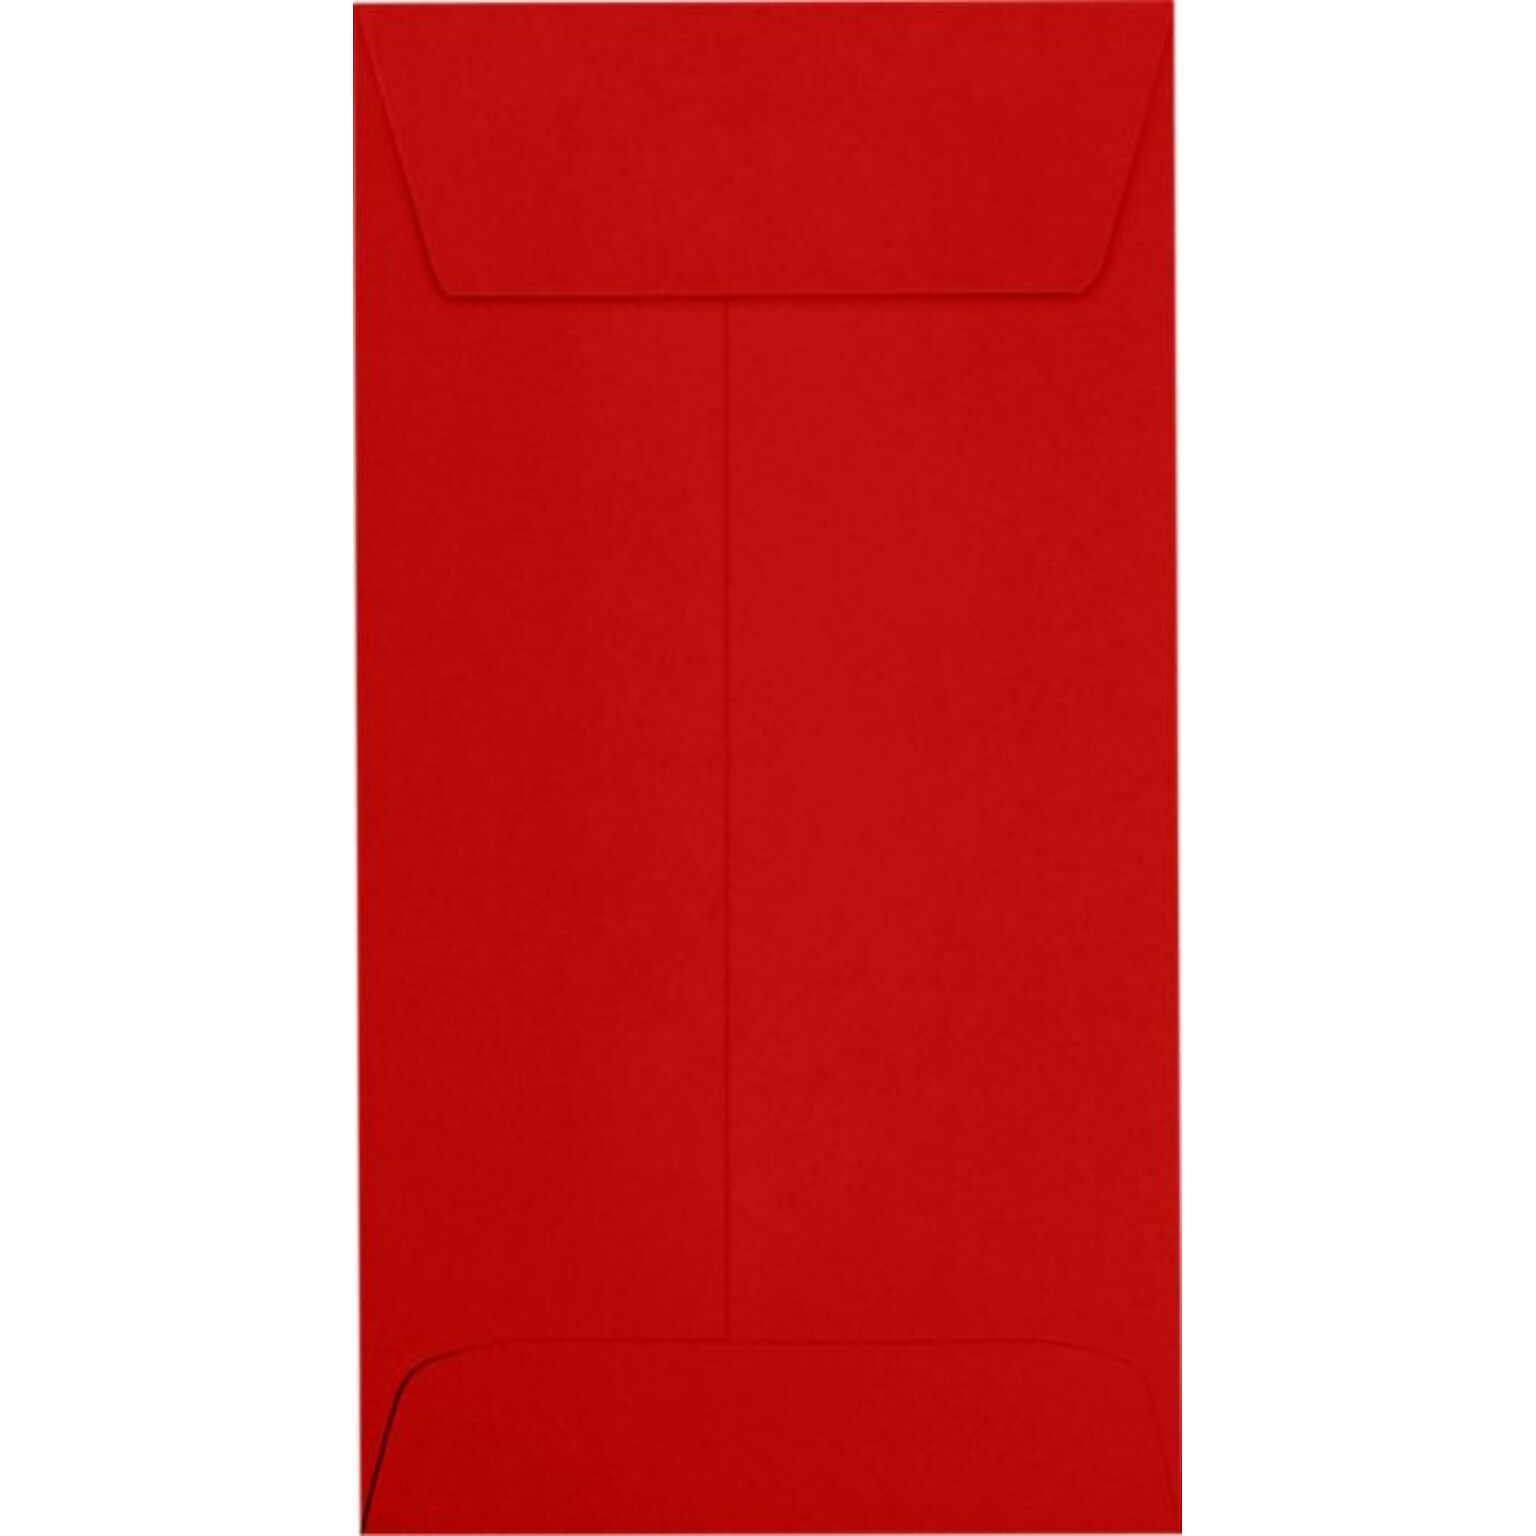 LUX Self Seal #7 Coin Envelope, 3 1/2 x 6 1/2, Ruby Red, 250/Pack (LUX-7CO-18-250)